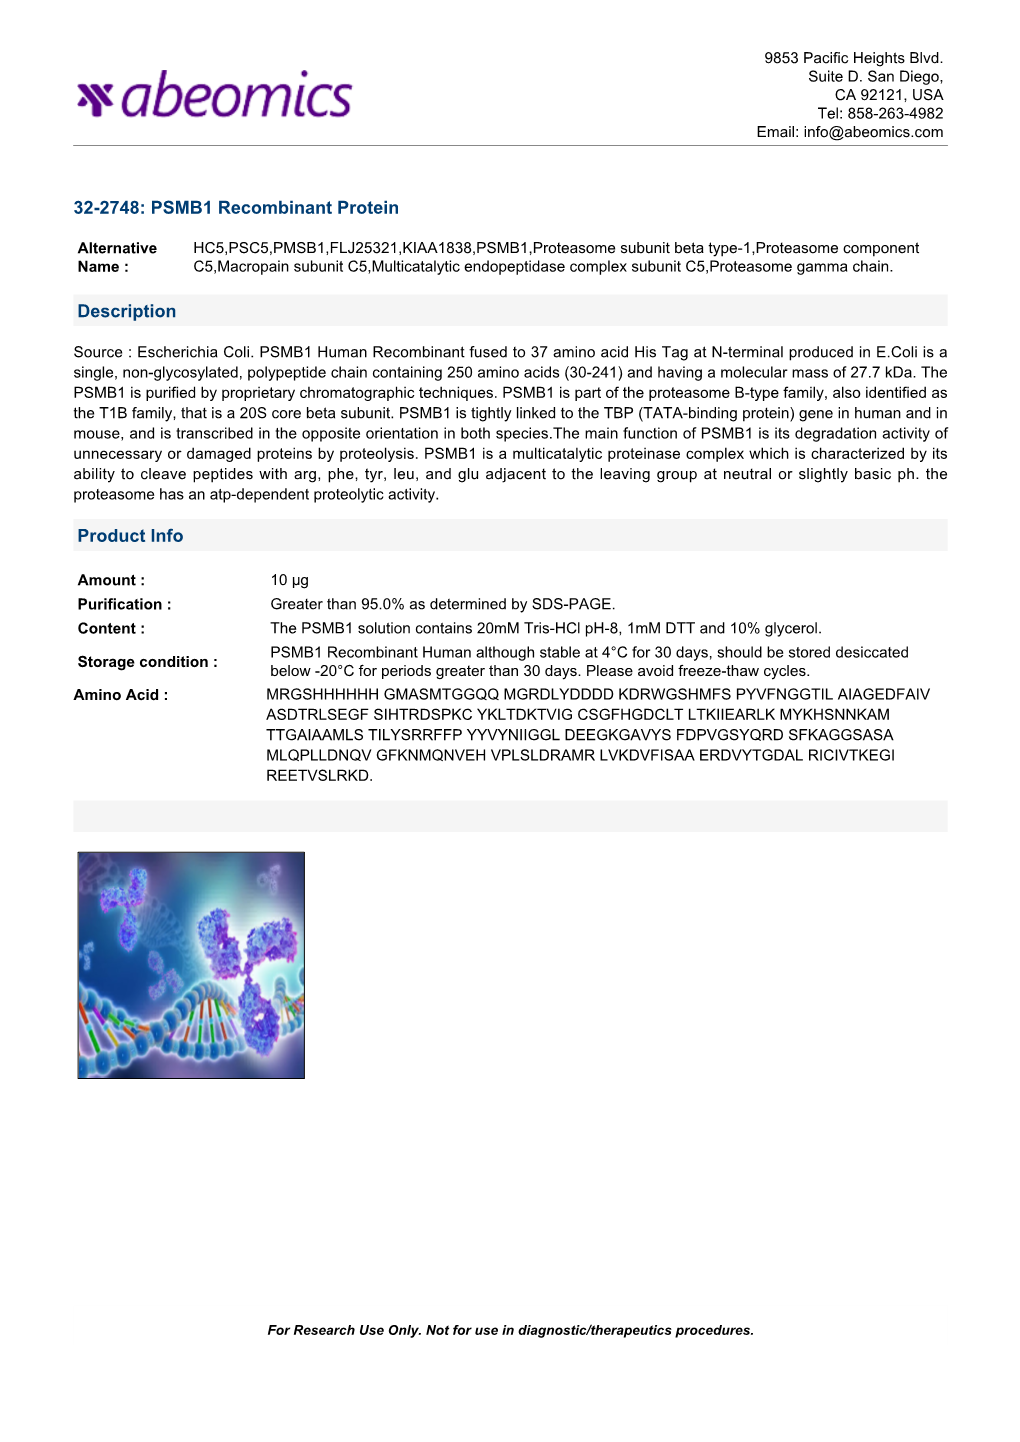 32-2748: PSMB1 Recombinant Protein Description Product Info